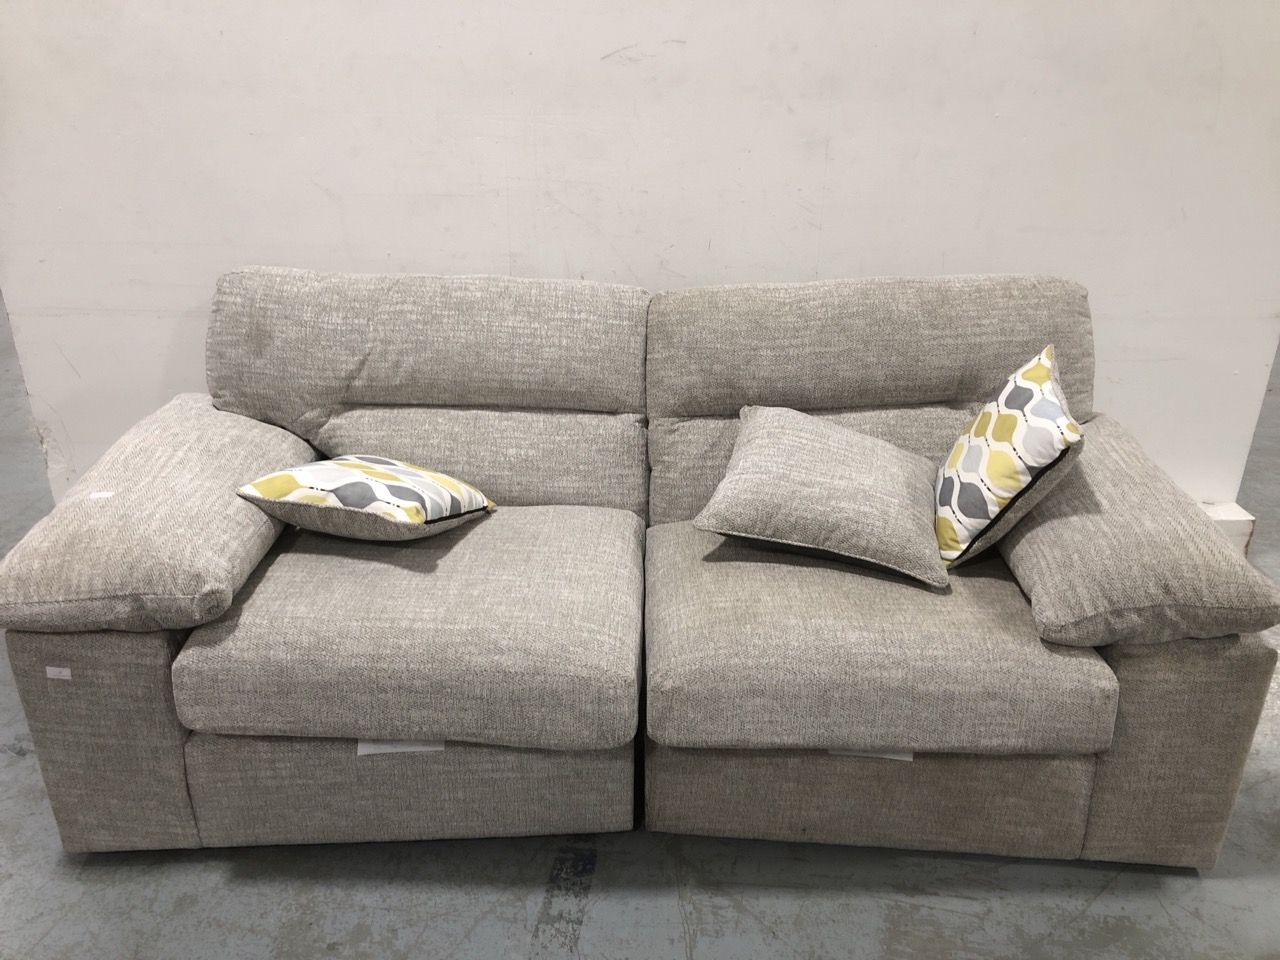 3 SEATER FABRIC SOFA IN GREY WITH 3 CUSHIONS RRP Â£500